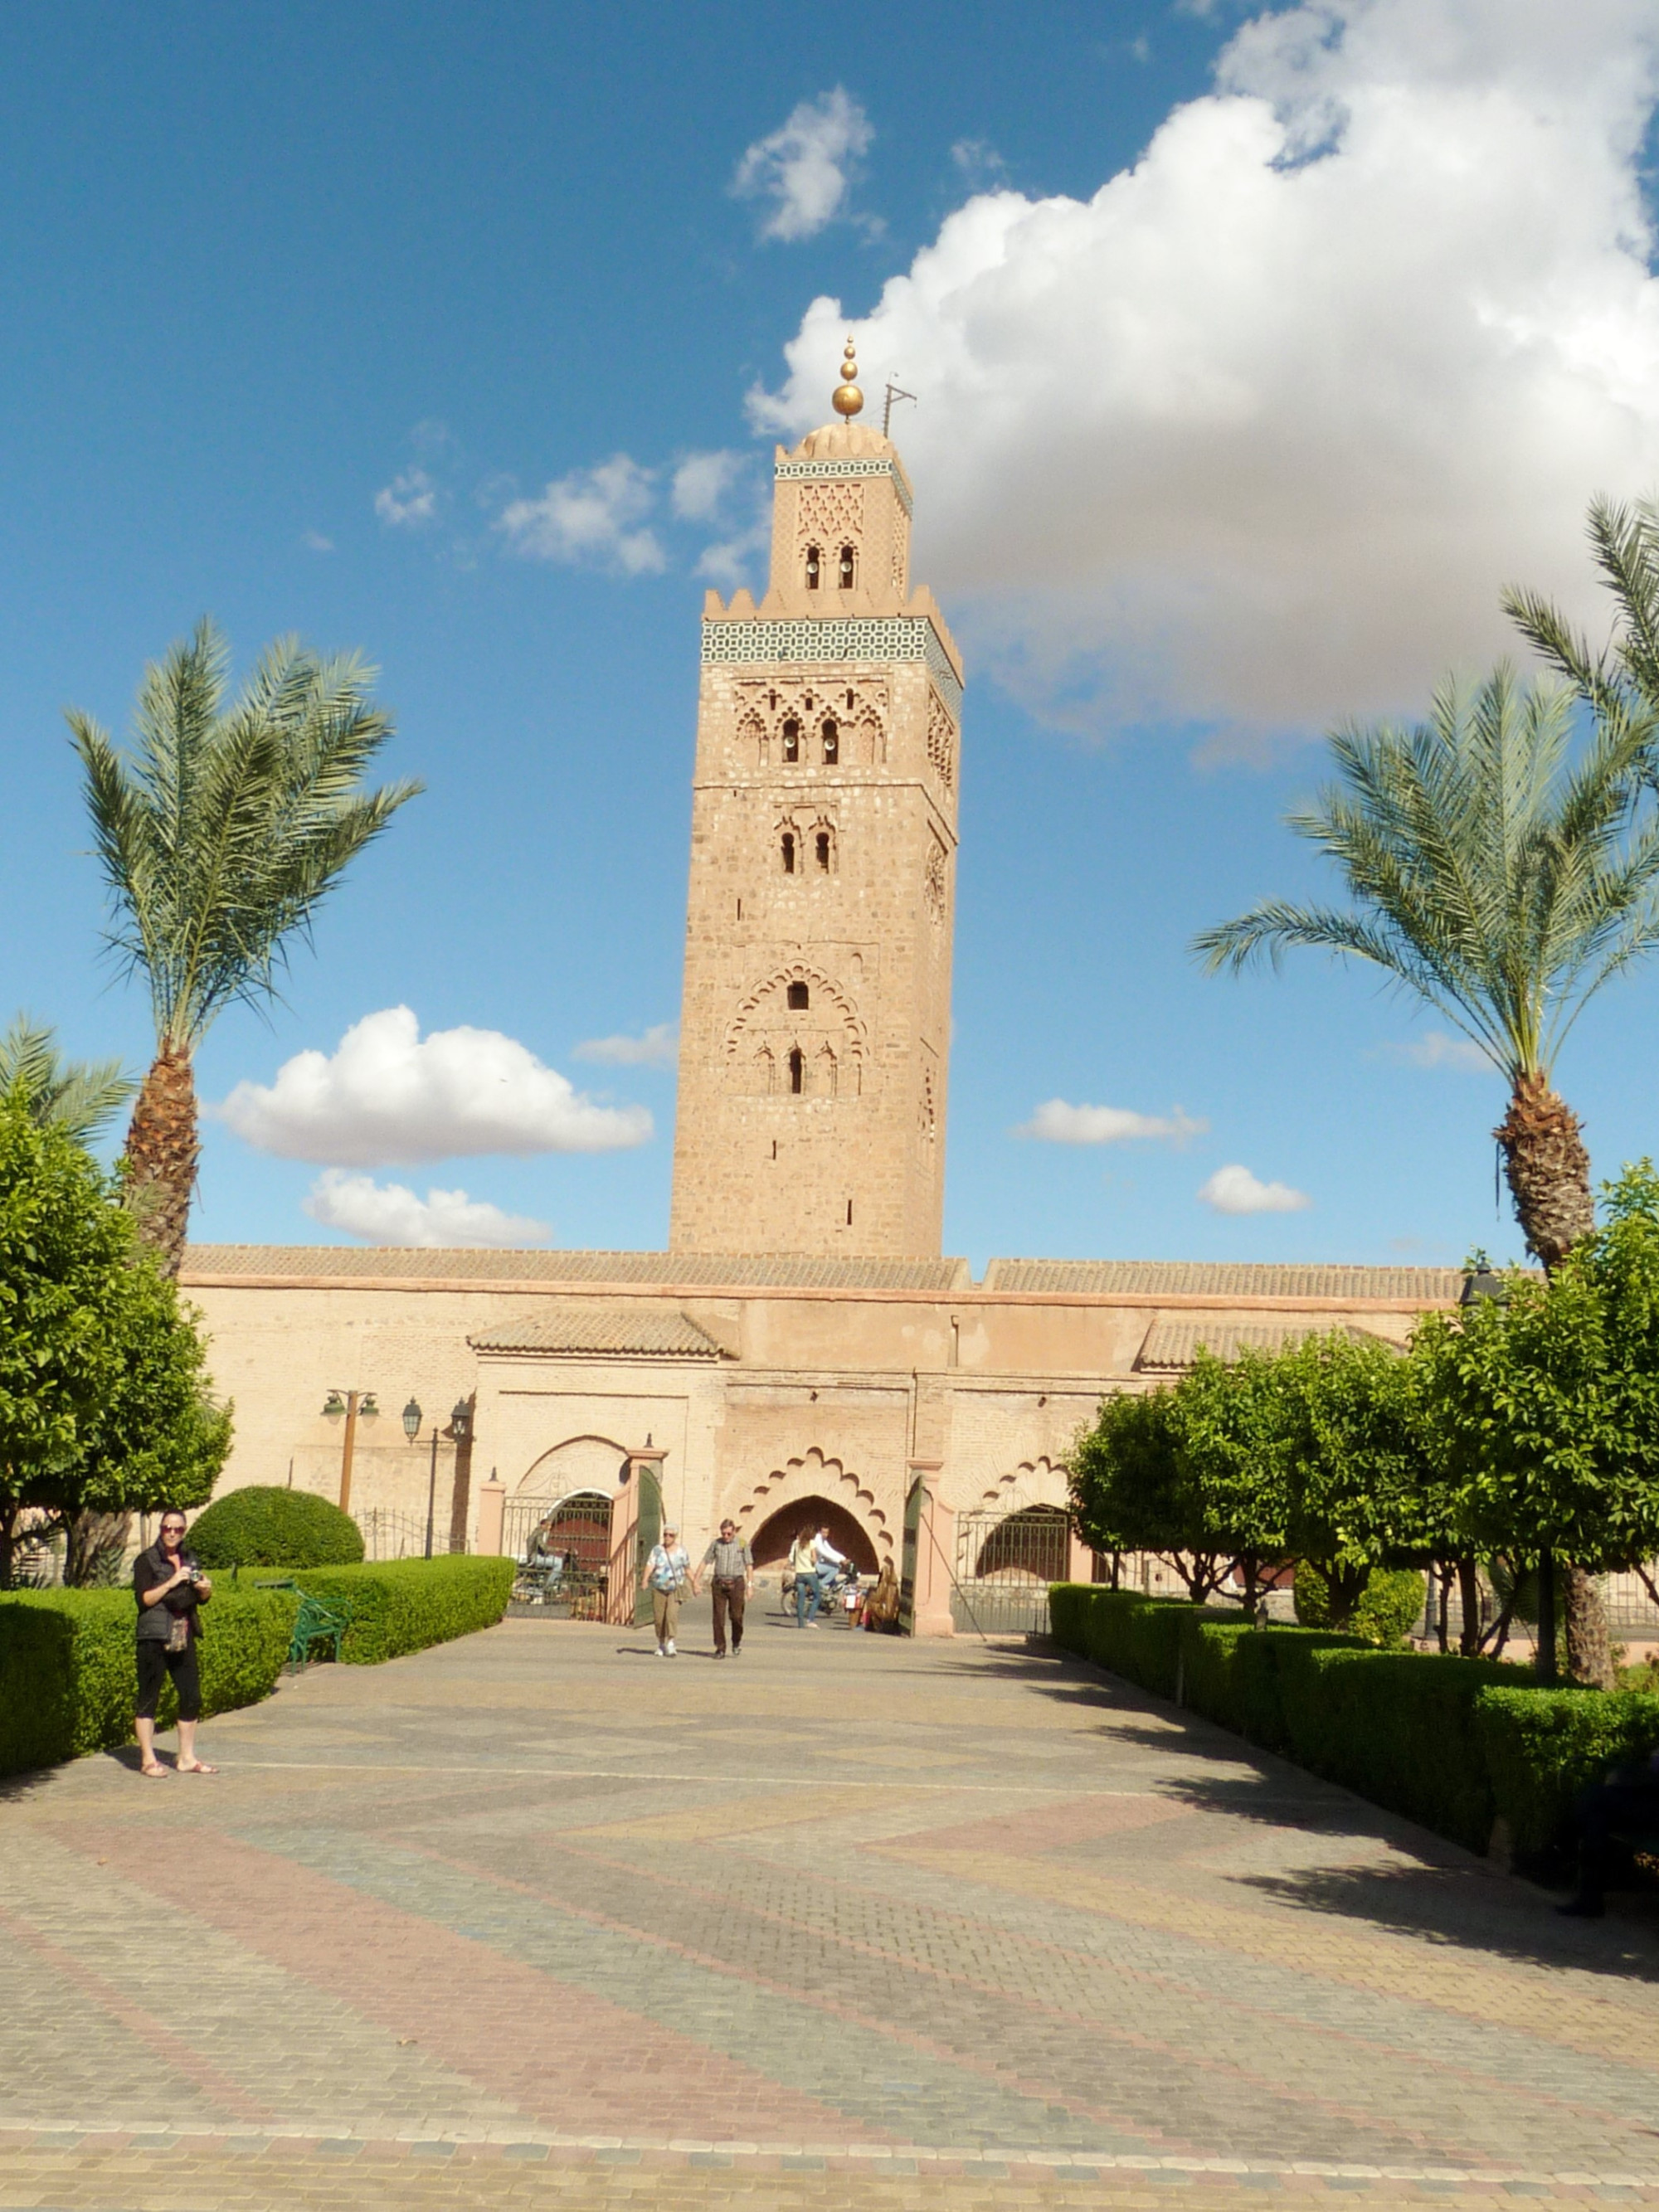 Koutoubia mosque and tower